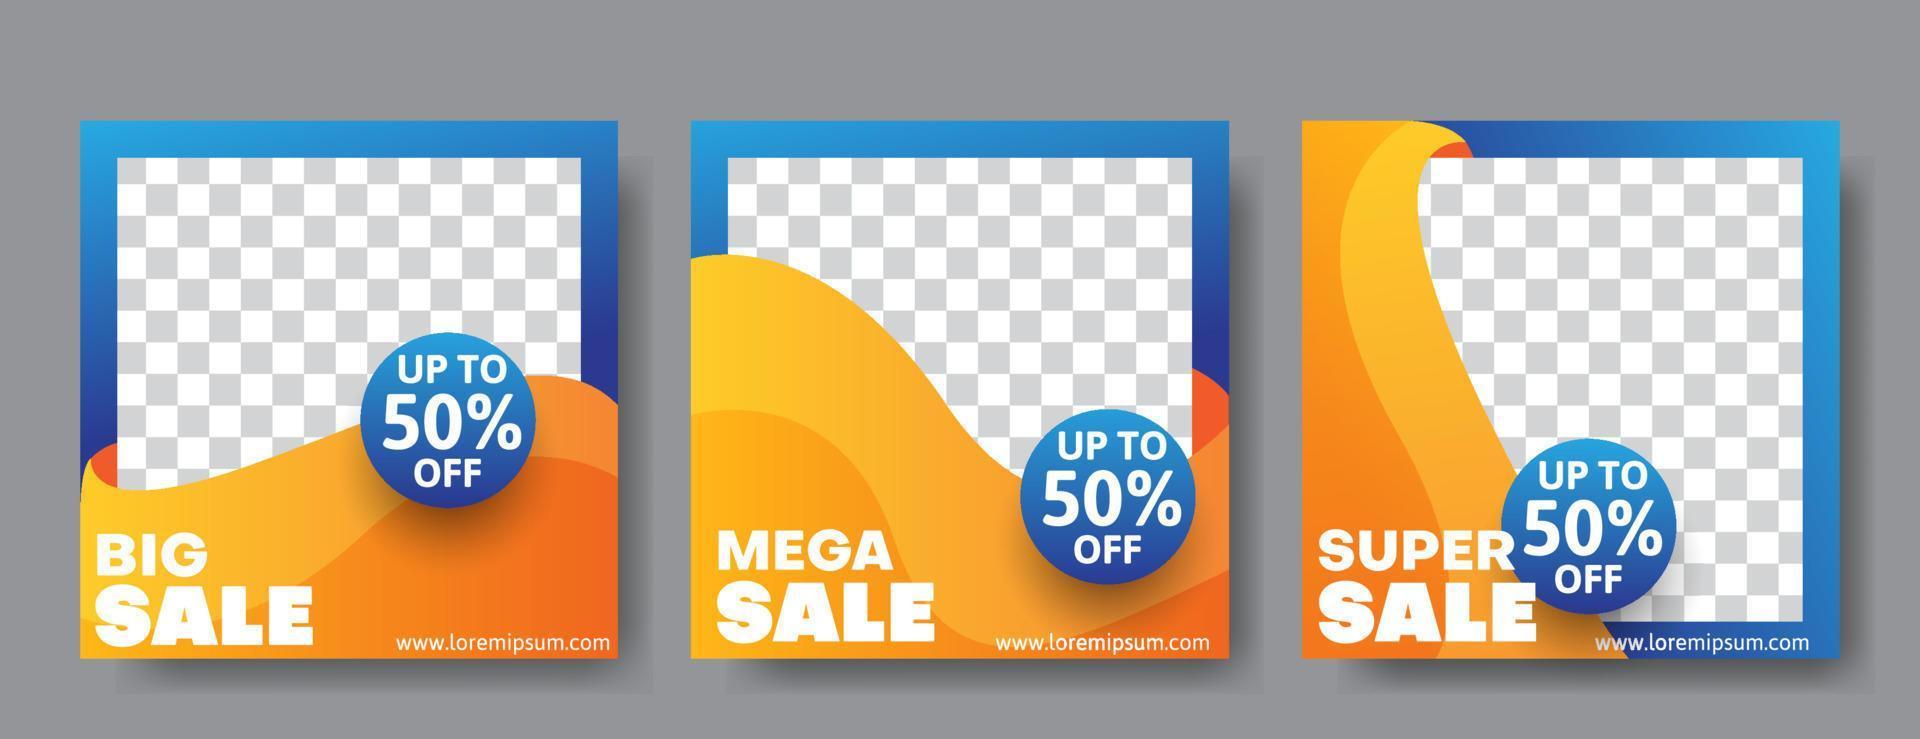 social media post template set in blue and orange color vector